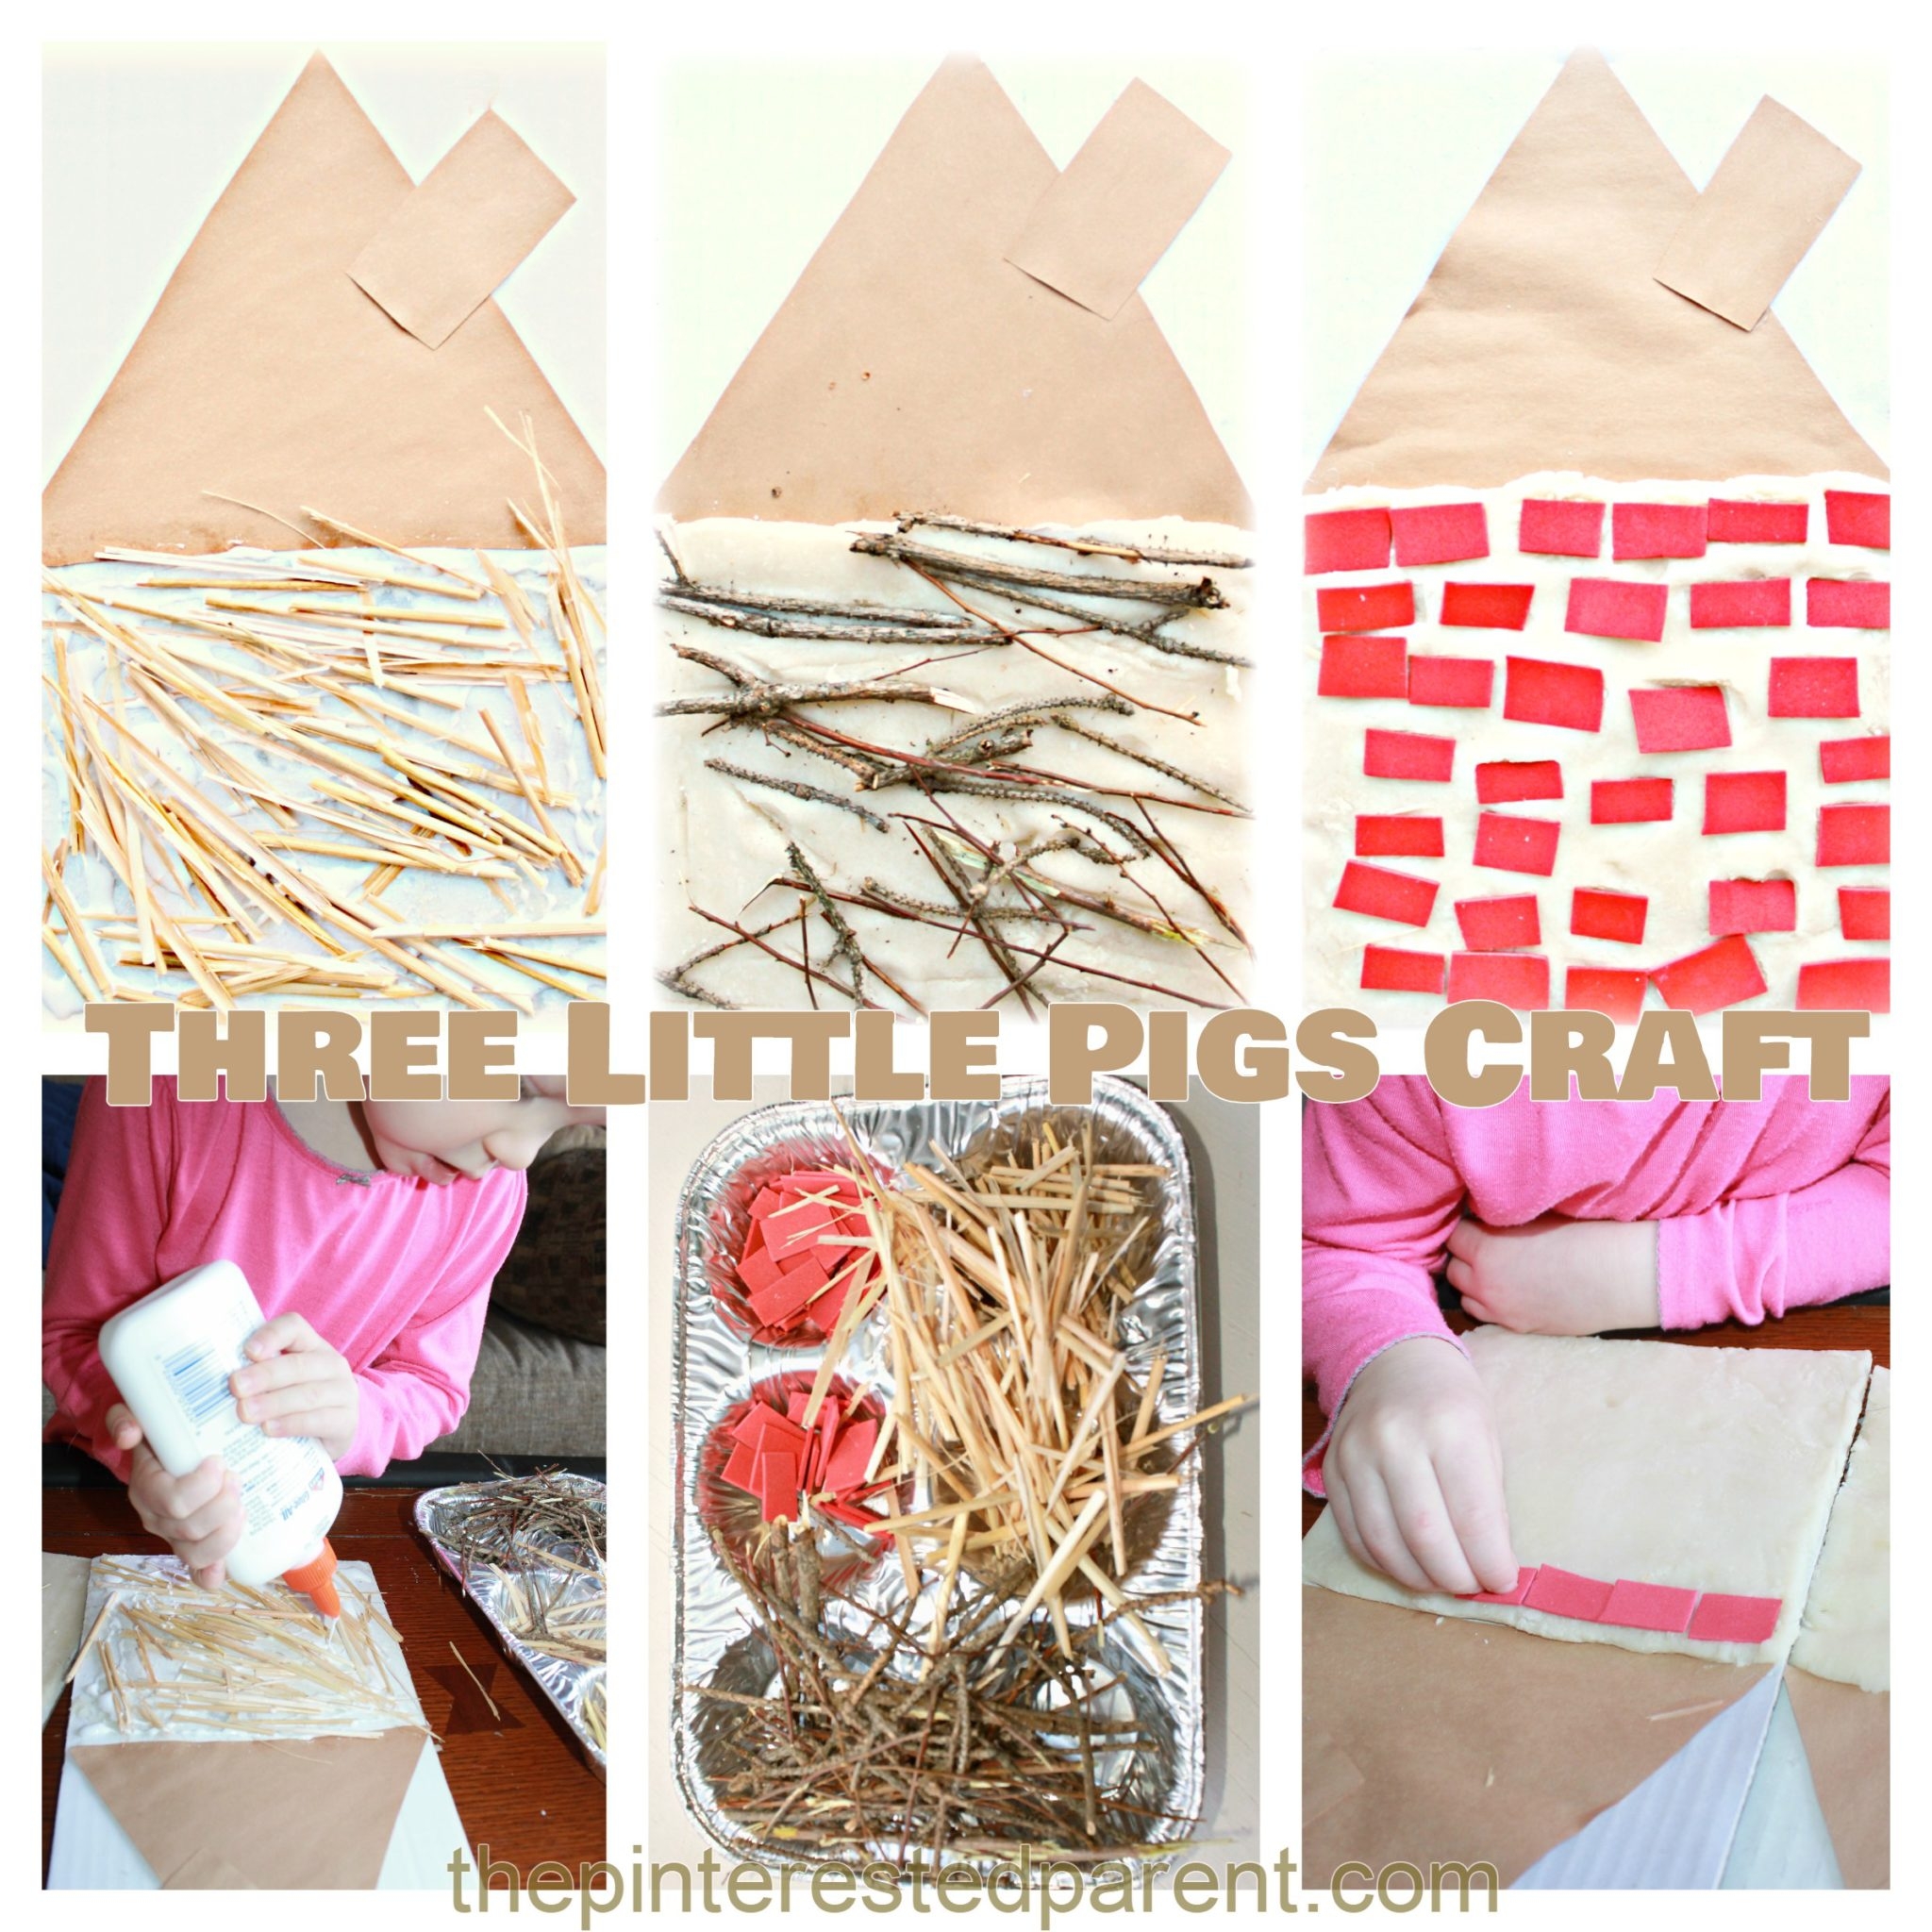 3 Little Pigs House Activity The Pinterested Parent